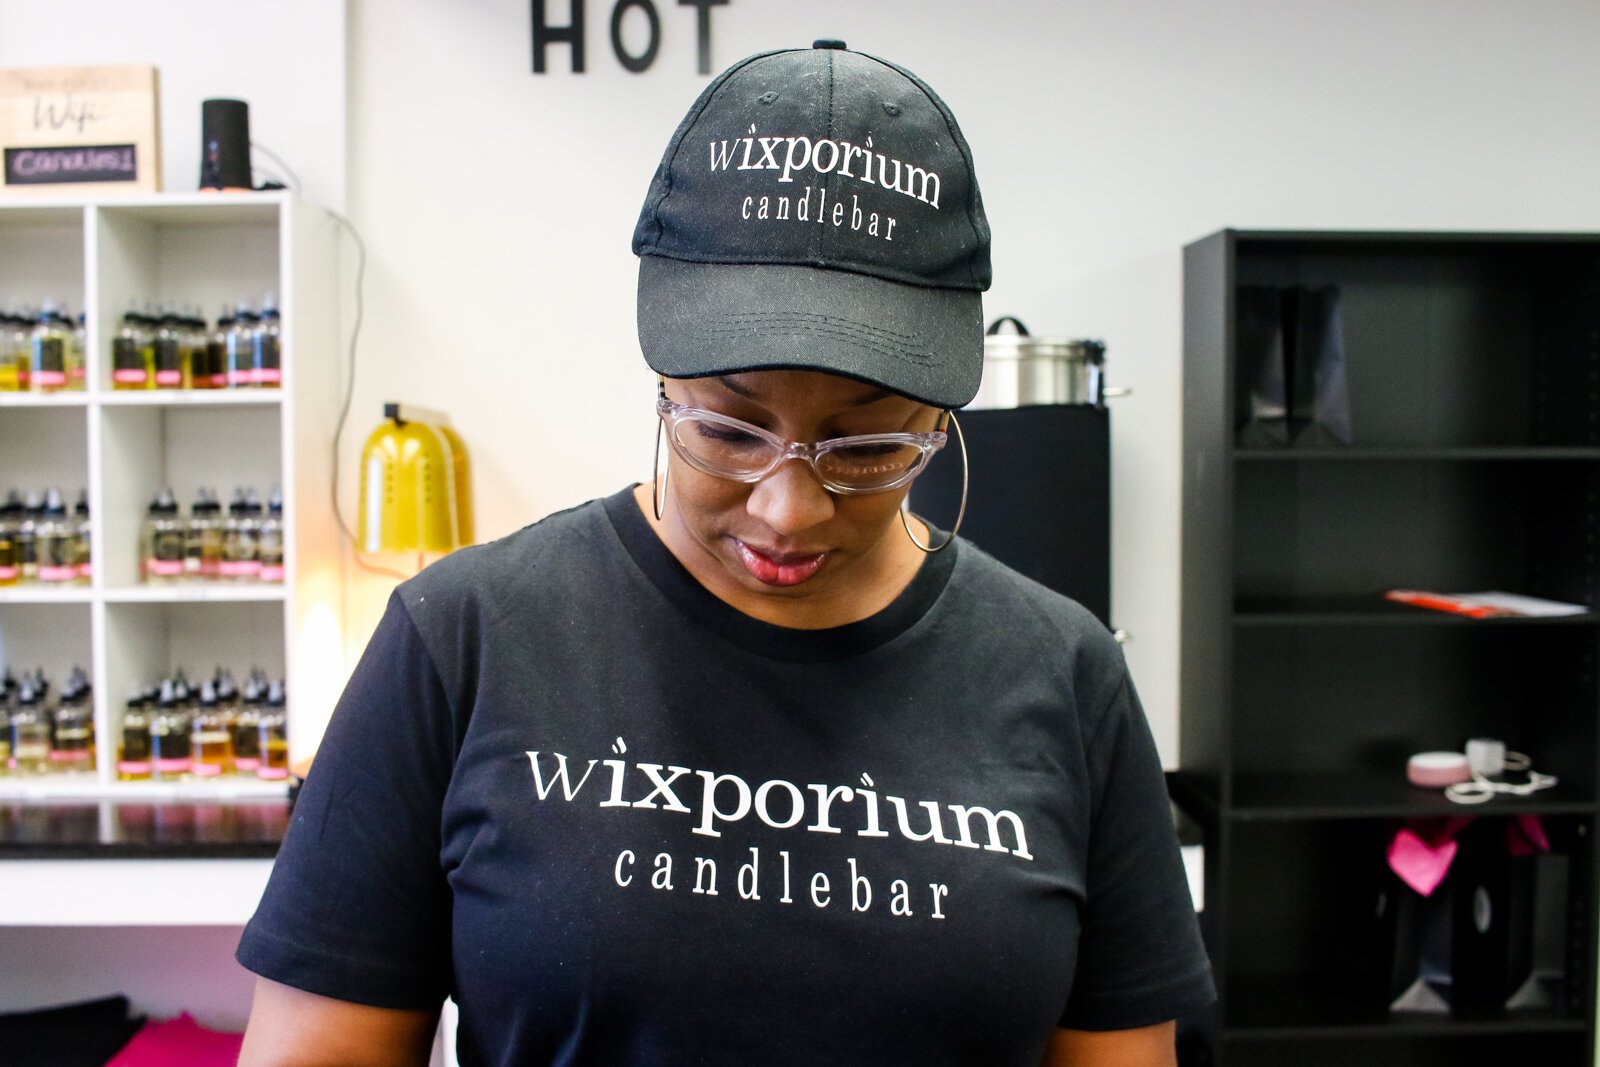 Londria Ladner, owner of Wixporium, helps customers at the candle bar.